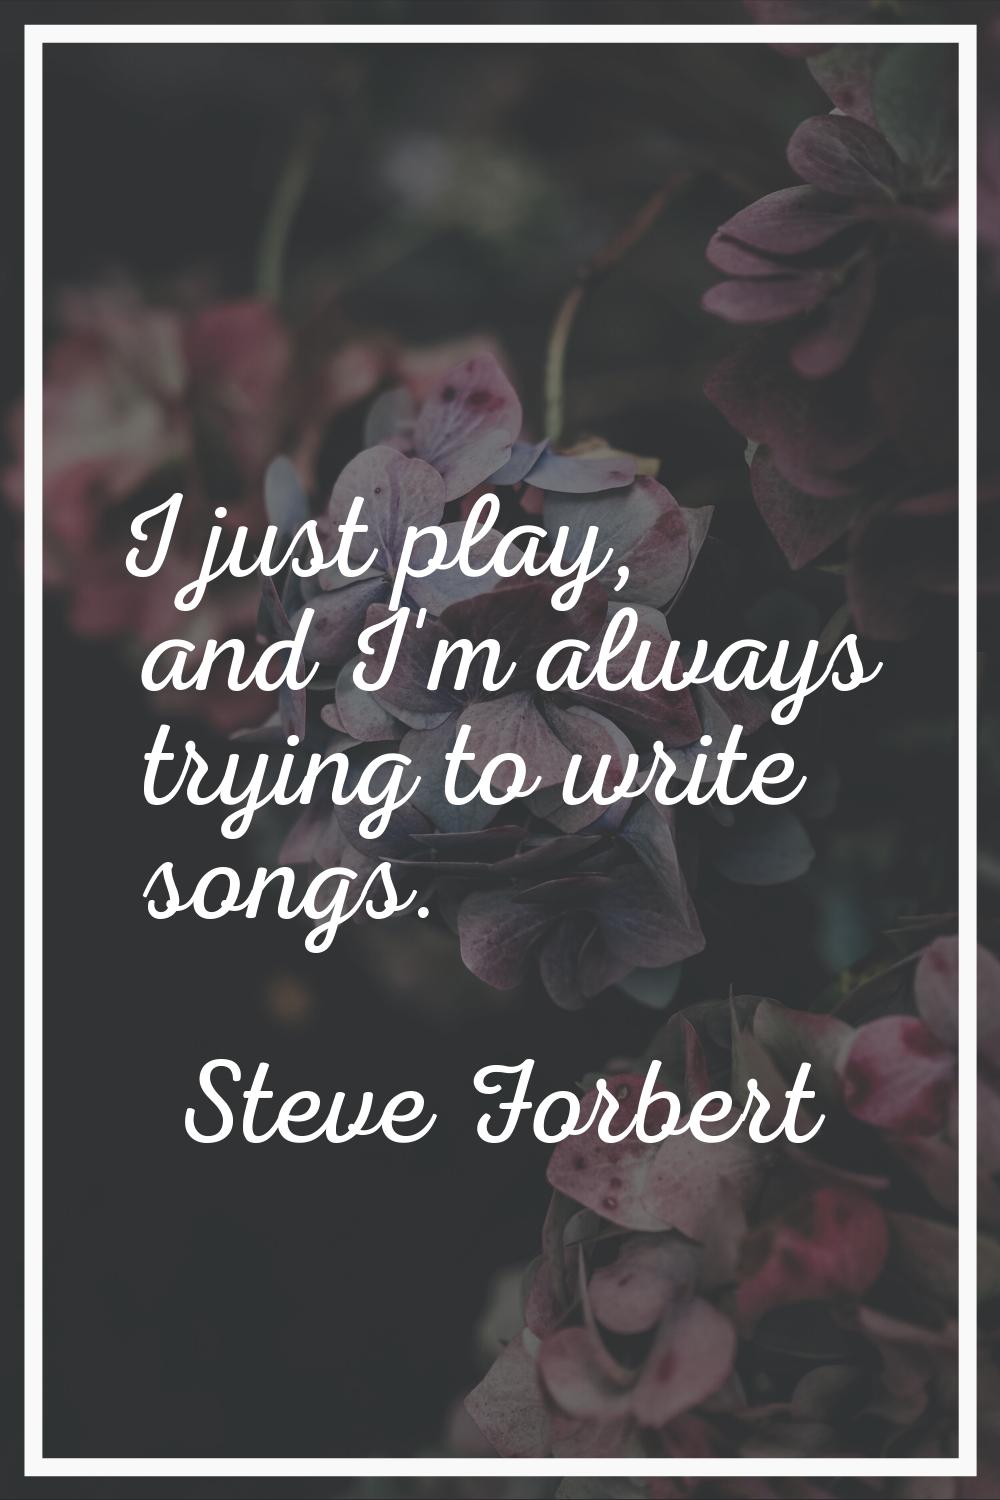 I just play, and I'm always trying to write songs.